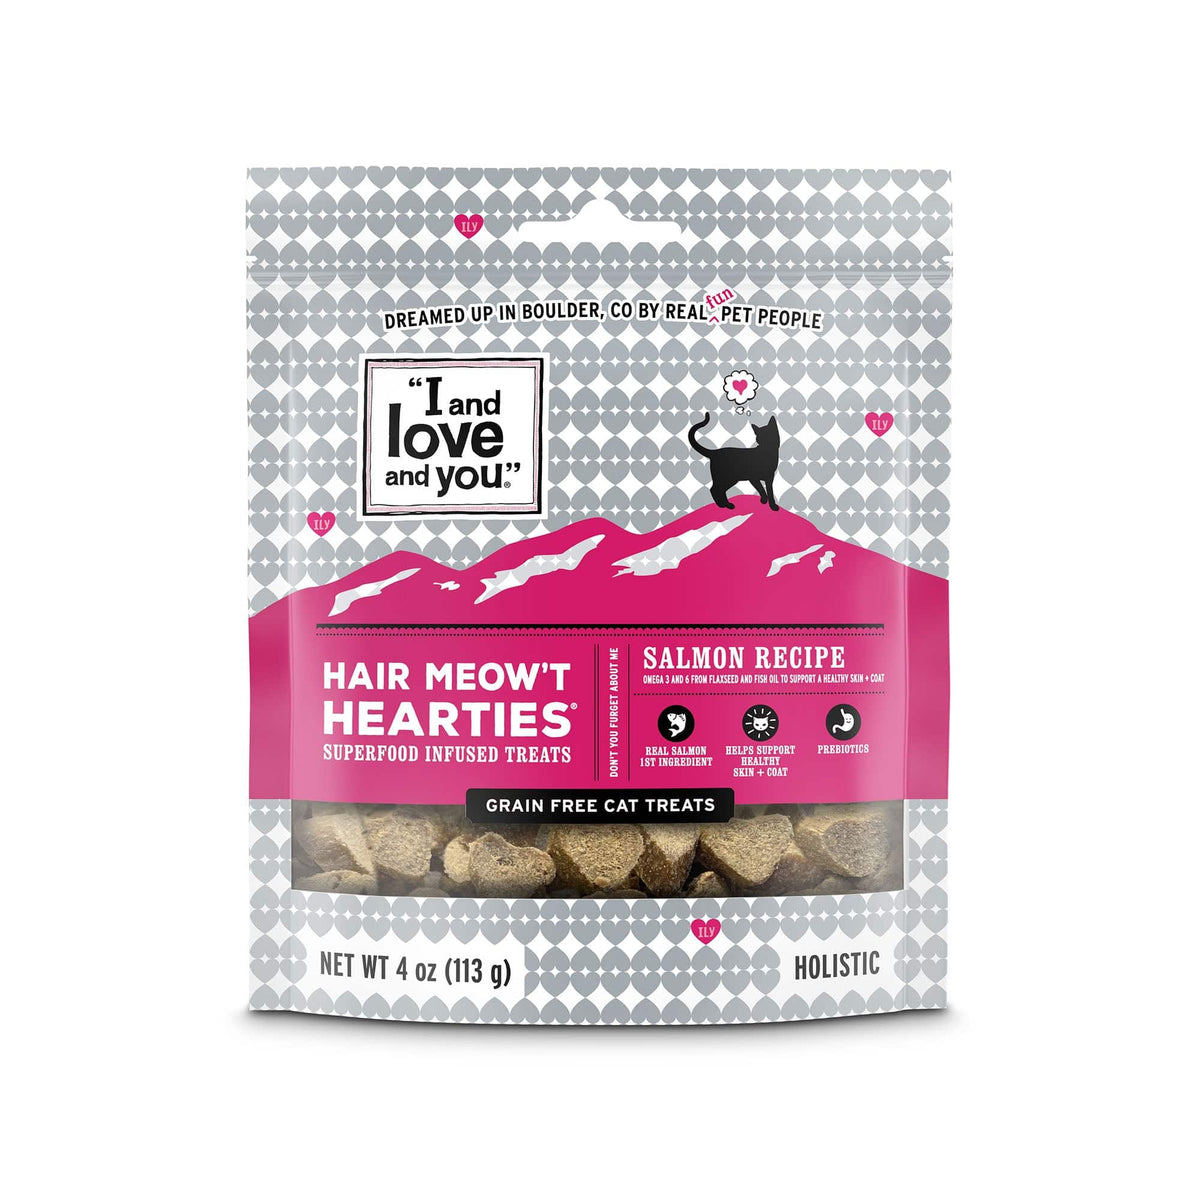 A bag of Hair Meow't Hearties cat food featuring real meat, Prebiotics + Probiotics, Omegas 3 & 6, and flaxseed for shiny coats. No grains or fillers.